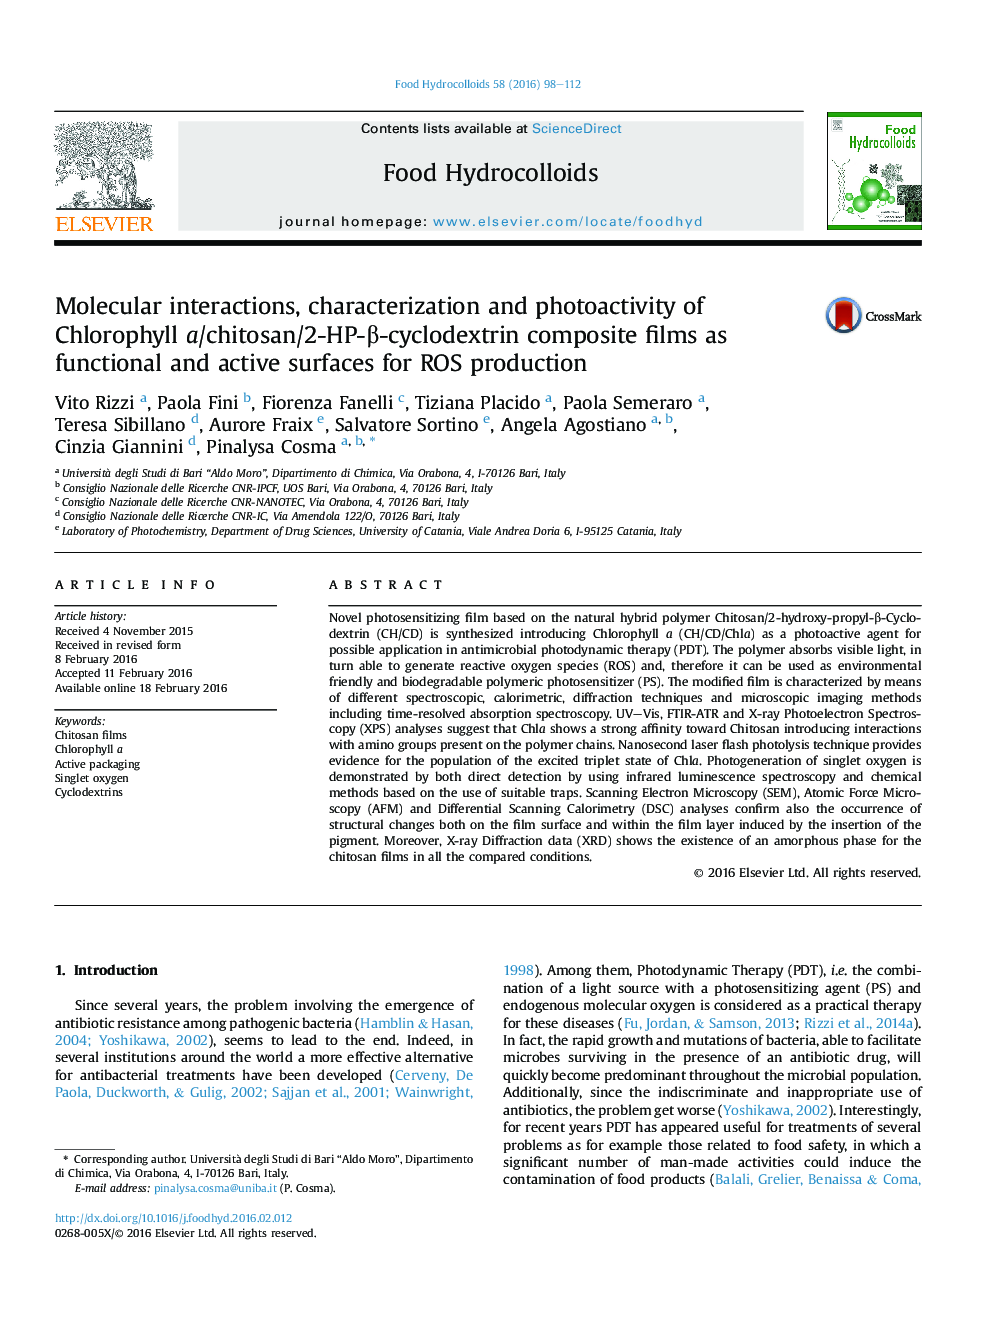 Molecular interactions, characterization and photoactivity of Chlorophyll a/chitosan/2-HP-Î²-cyclodextrin composite films as functional and active surfaces for ROS production